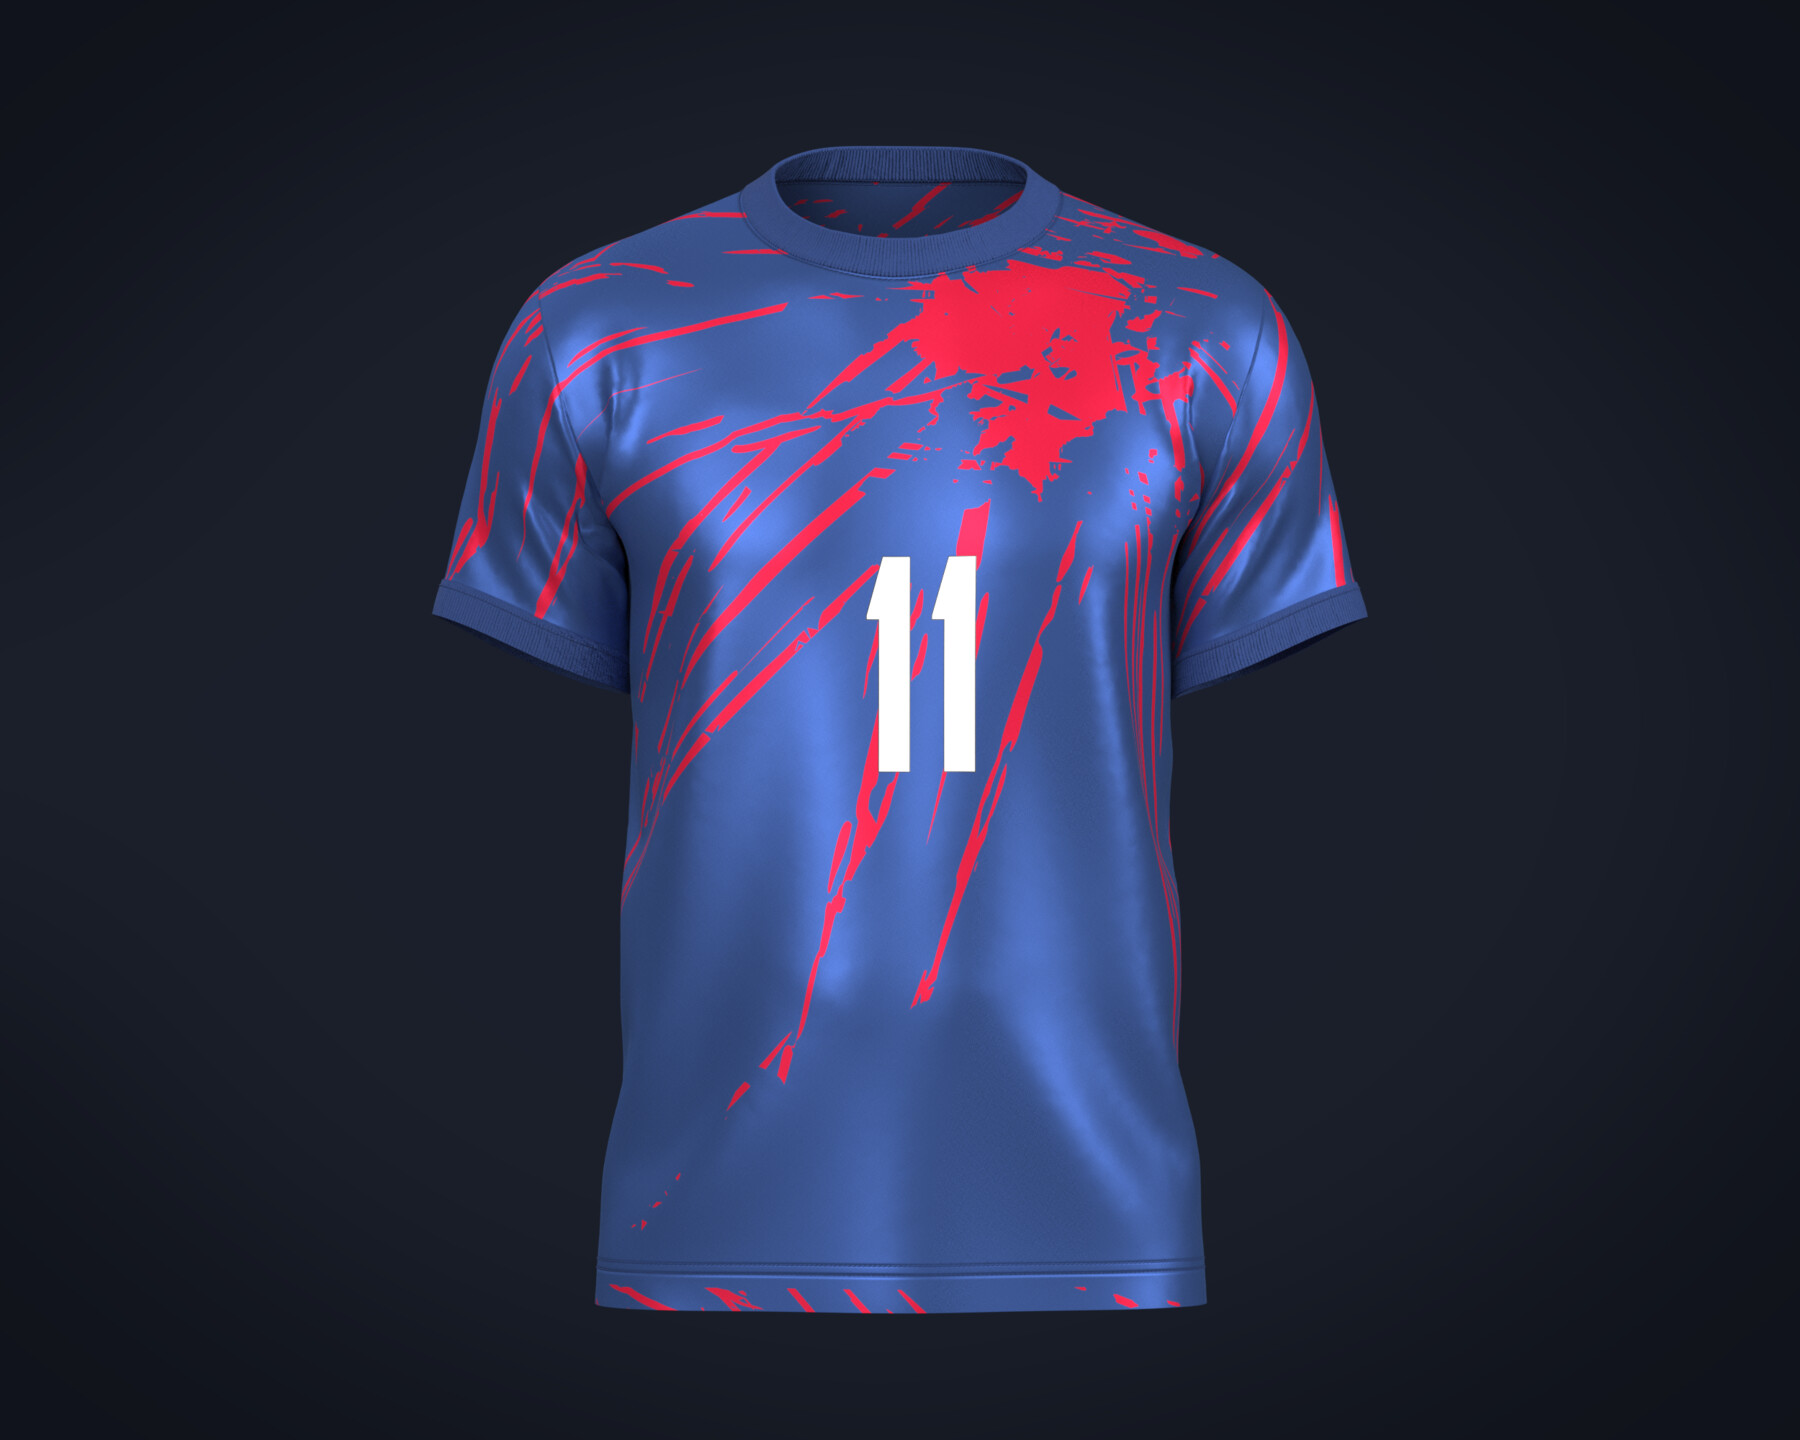 Football Kit Player Shirt Soccer Blue and Red Download and Buy Now